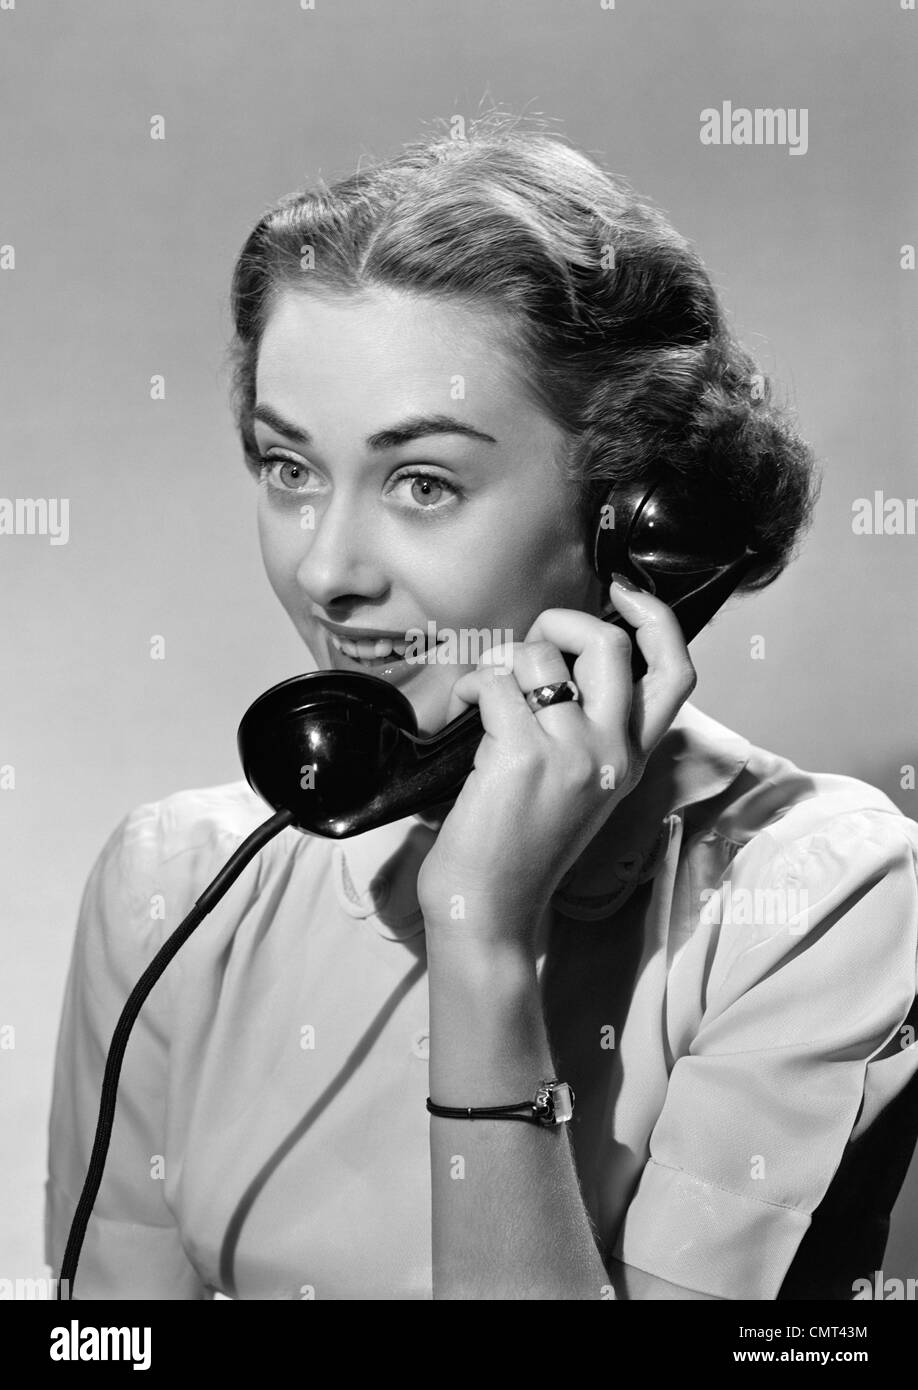 1950 SMILING WOMAN TALKING ON TELEPHONE Banque D'Images